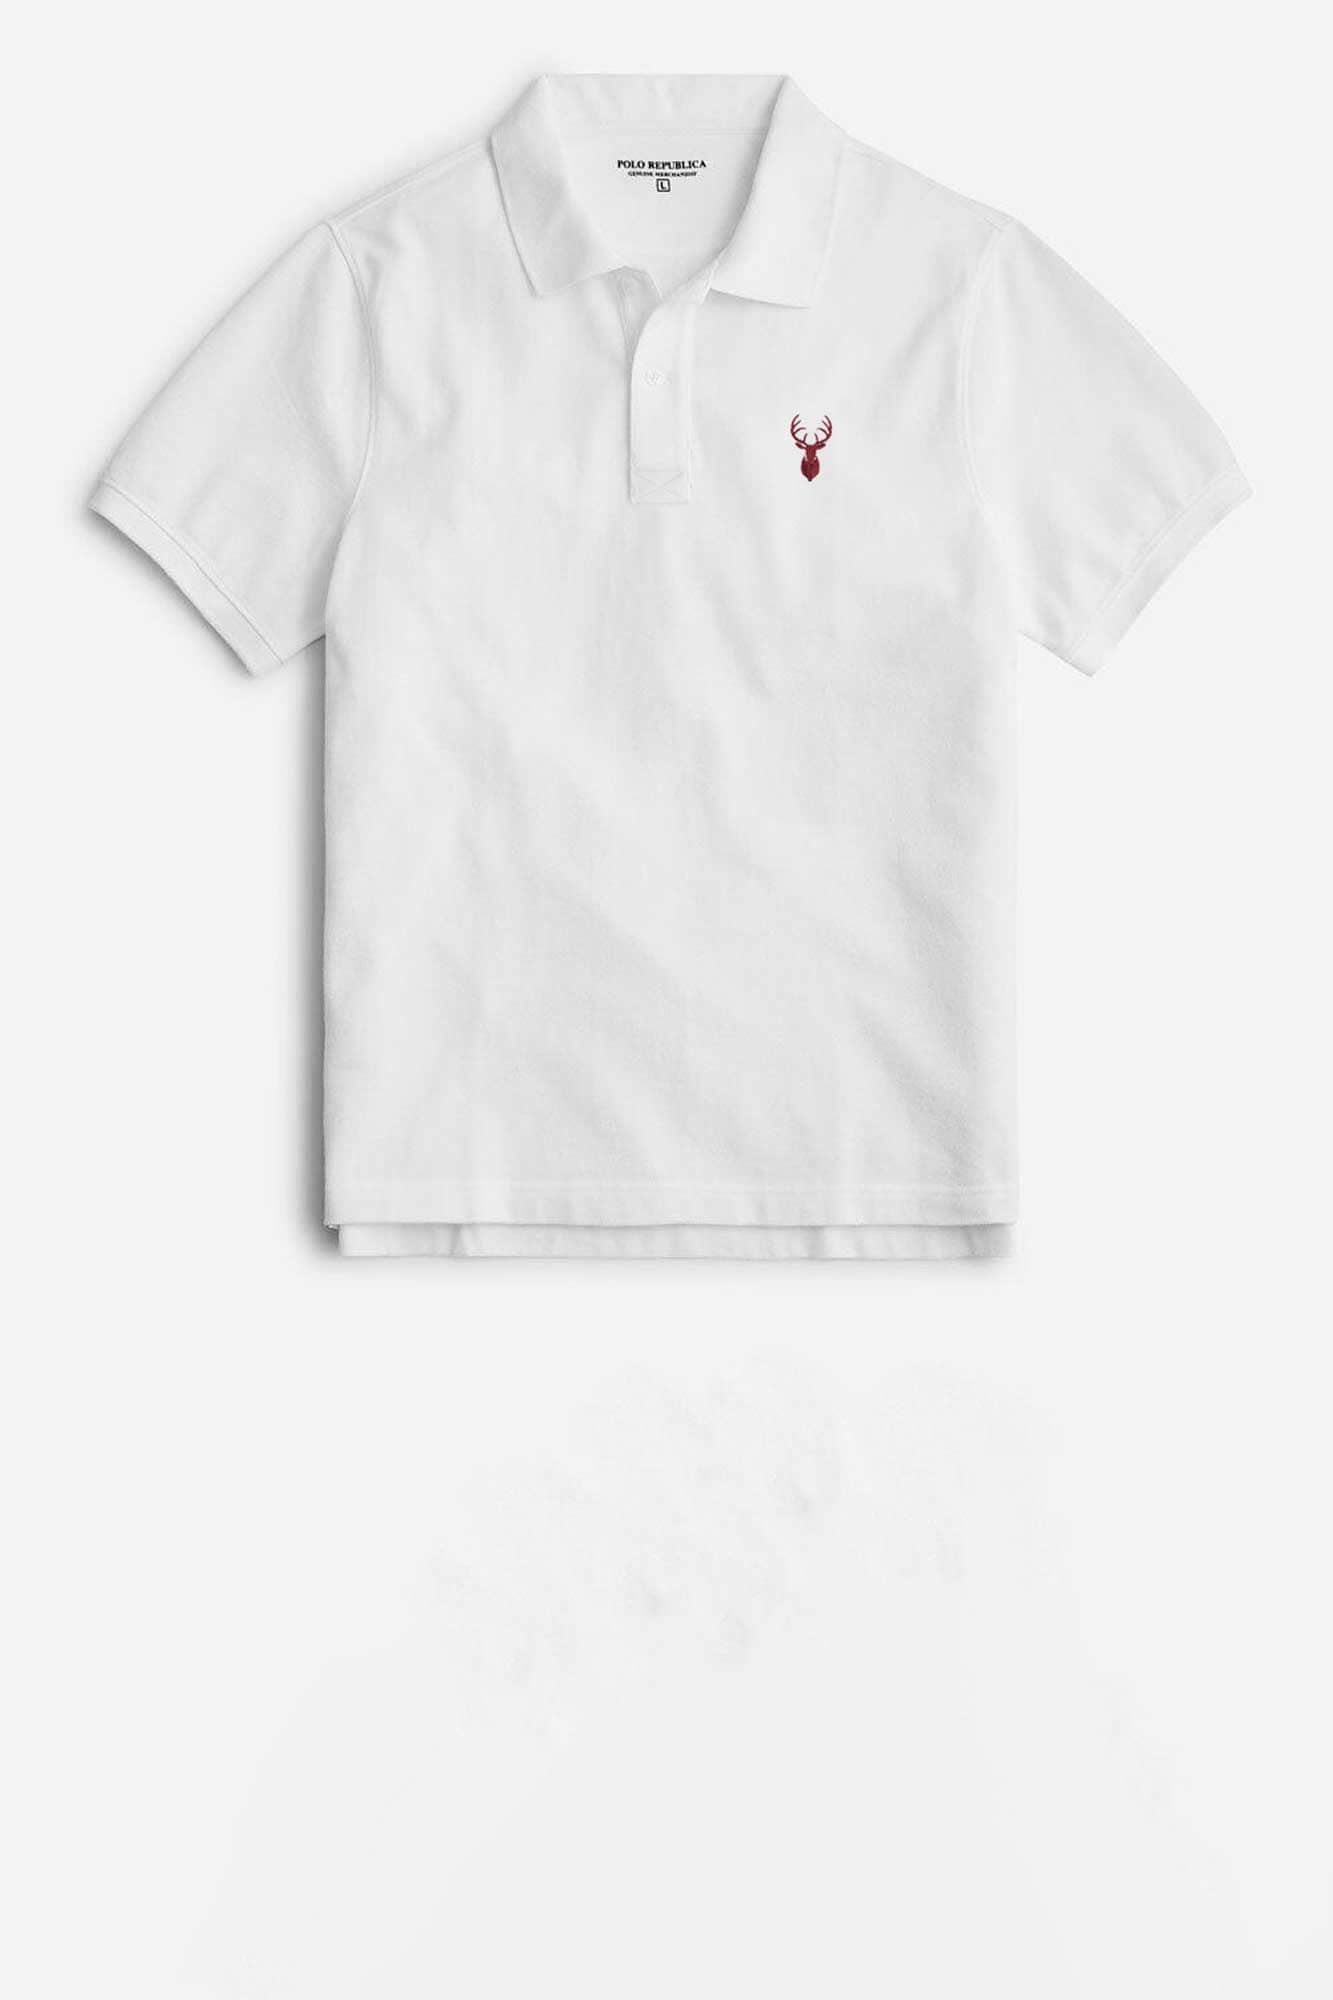 Polo Republica Men's Noble Deer Embroidered Short Sleeve Polo Shirt Men's Polo Shirt Polo Republica 